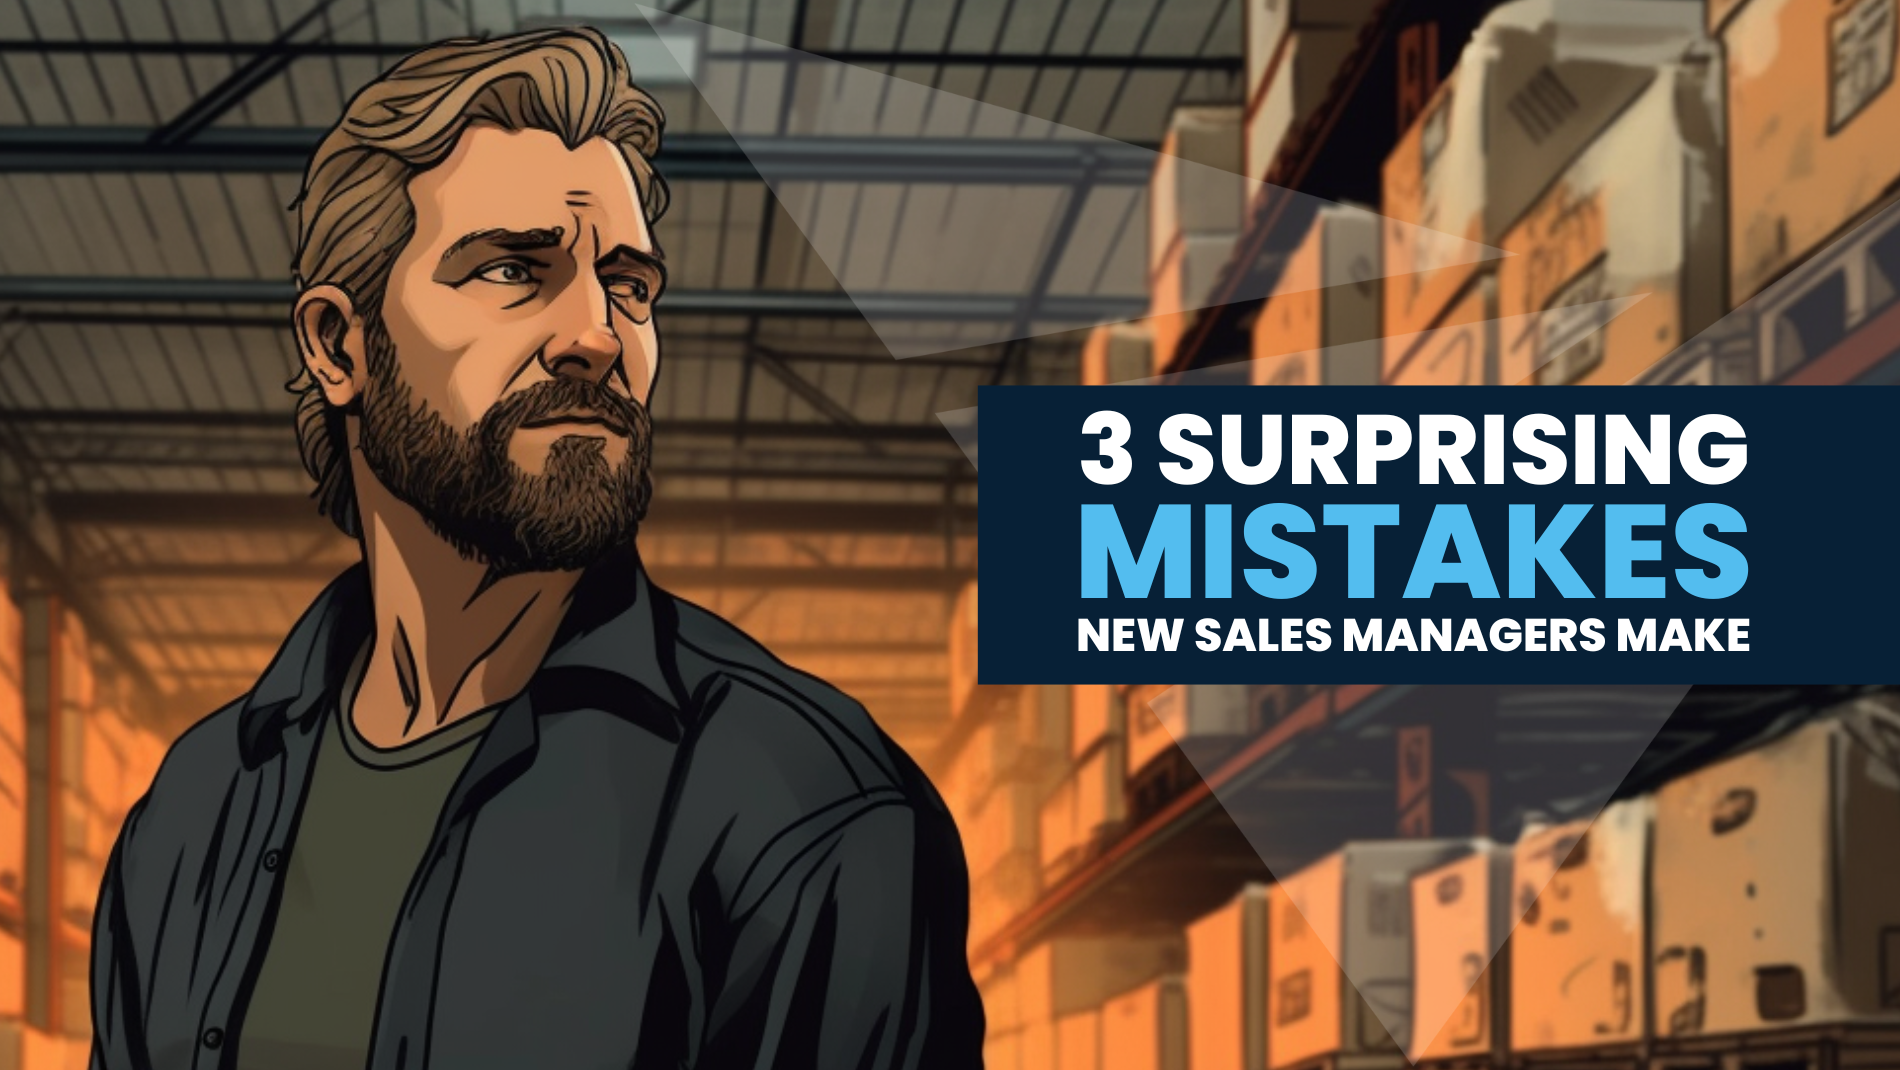 3 Surprising Mistakes New Sales Managers Make